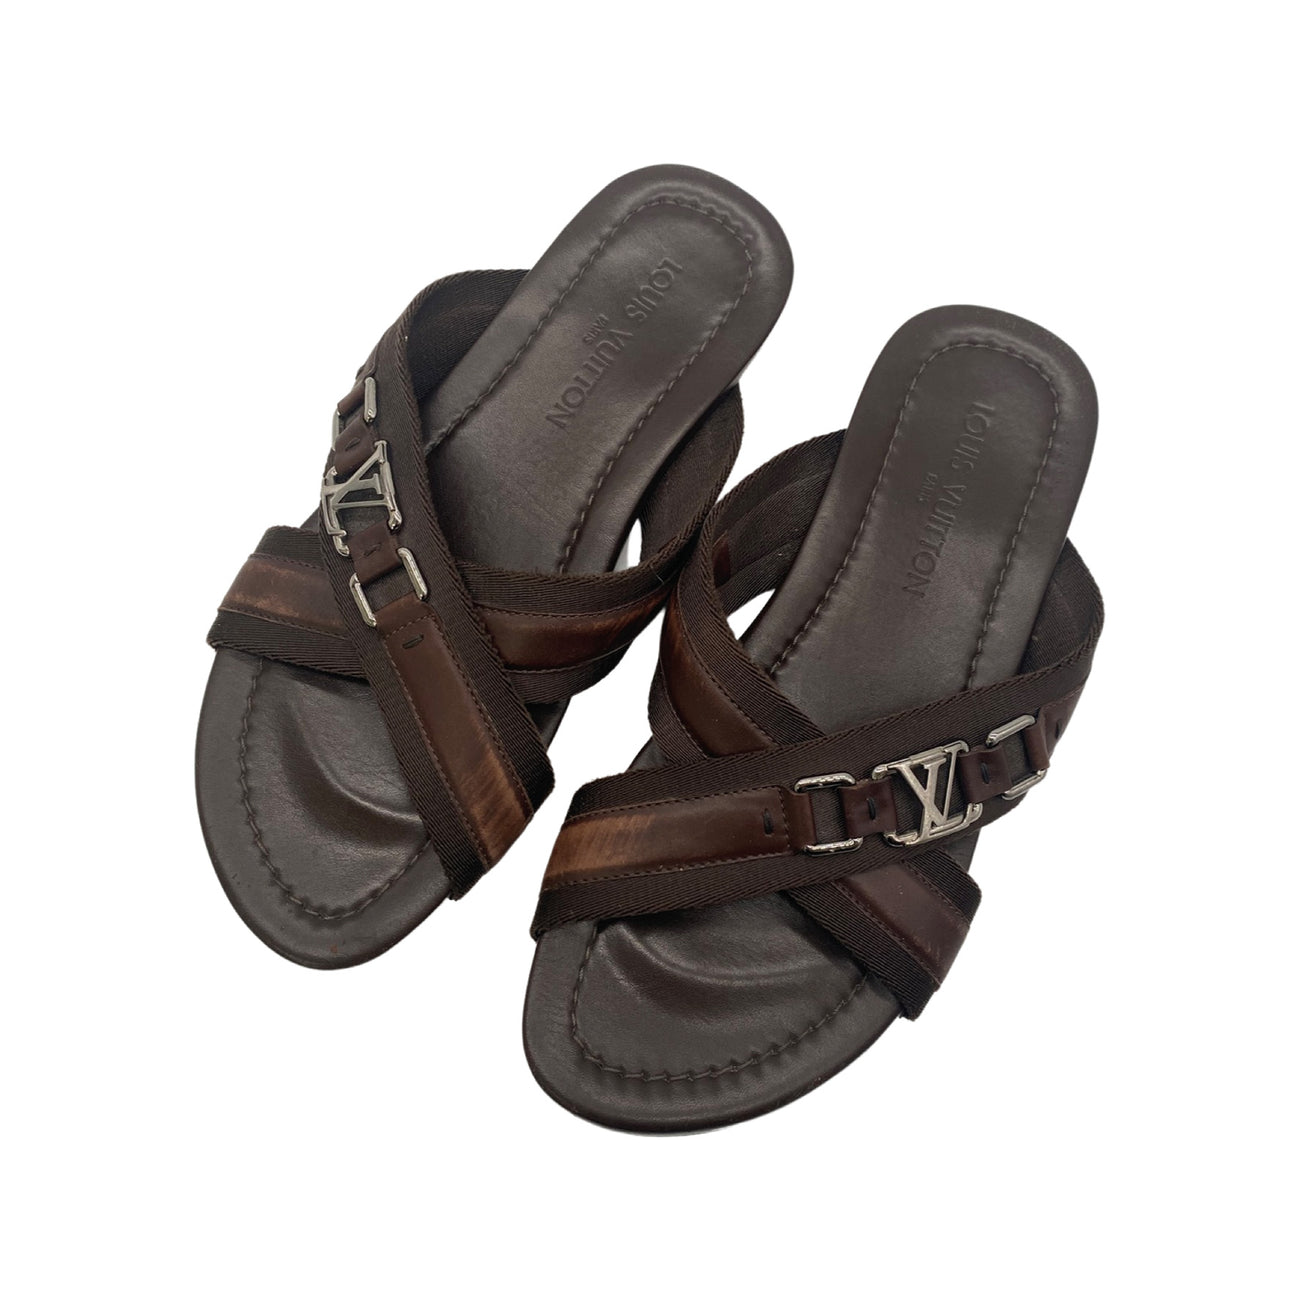 Leather sandals Louis Vuitton Brown size 36 EU in Leather - 23148902